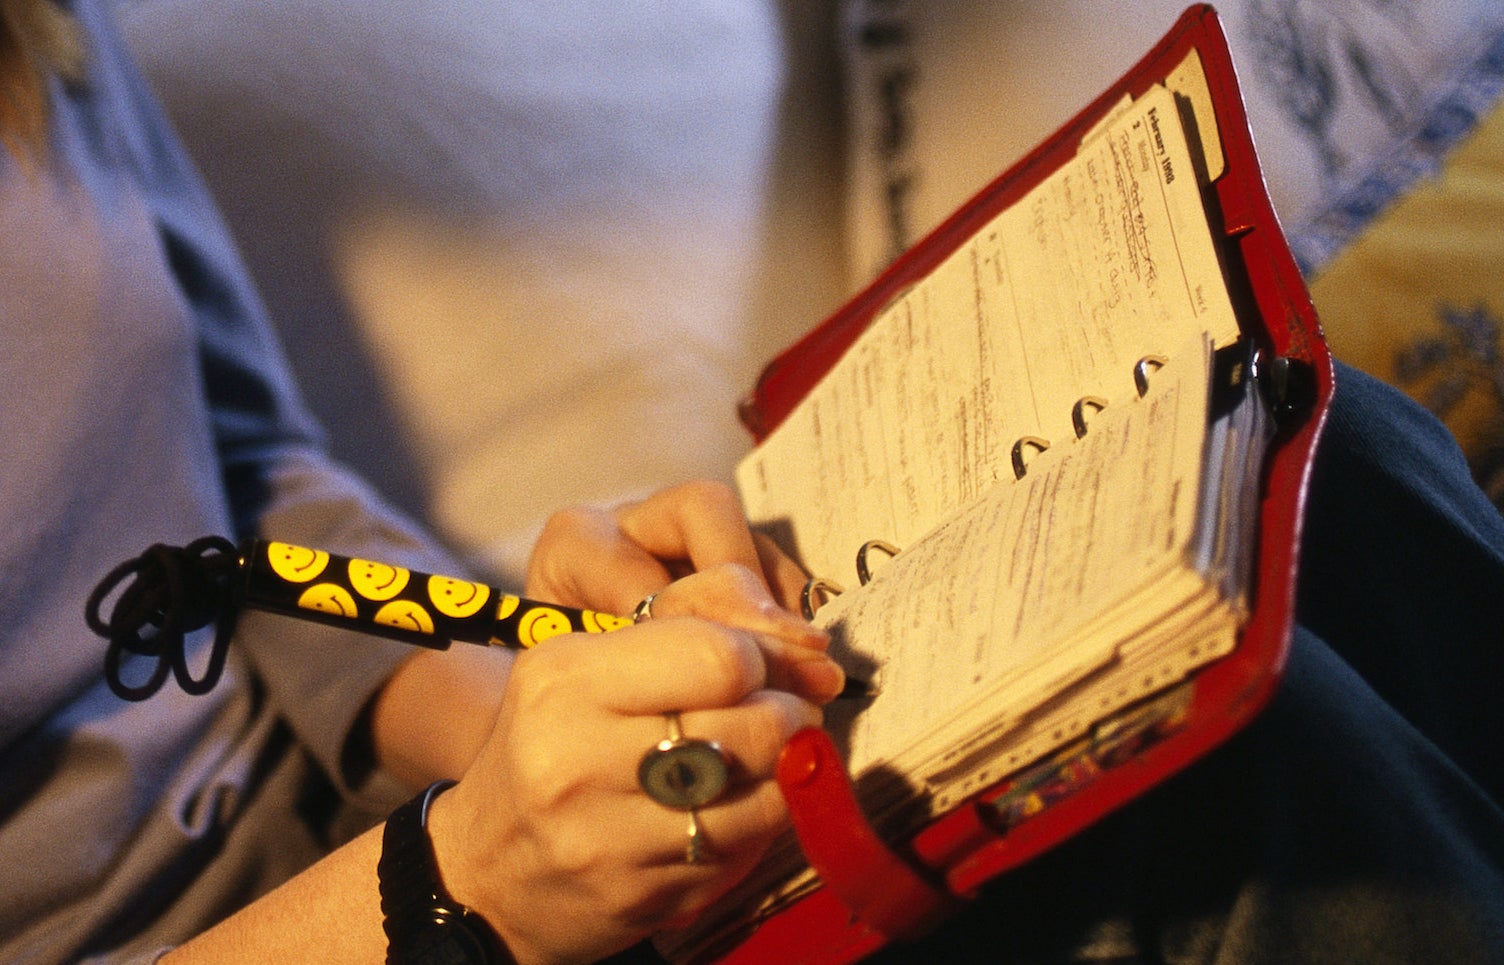 A close-up of a teen age girl writing into her red day planner with a smiley face pen